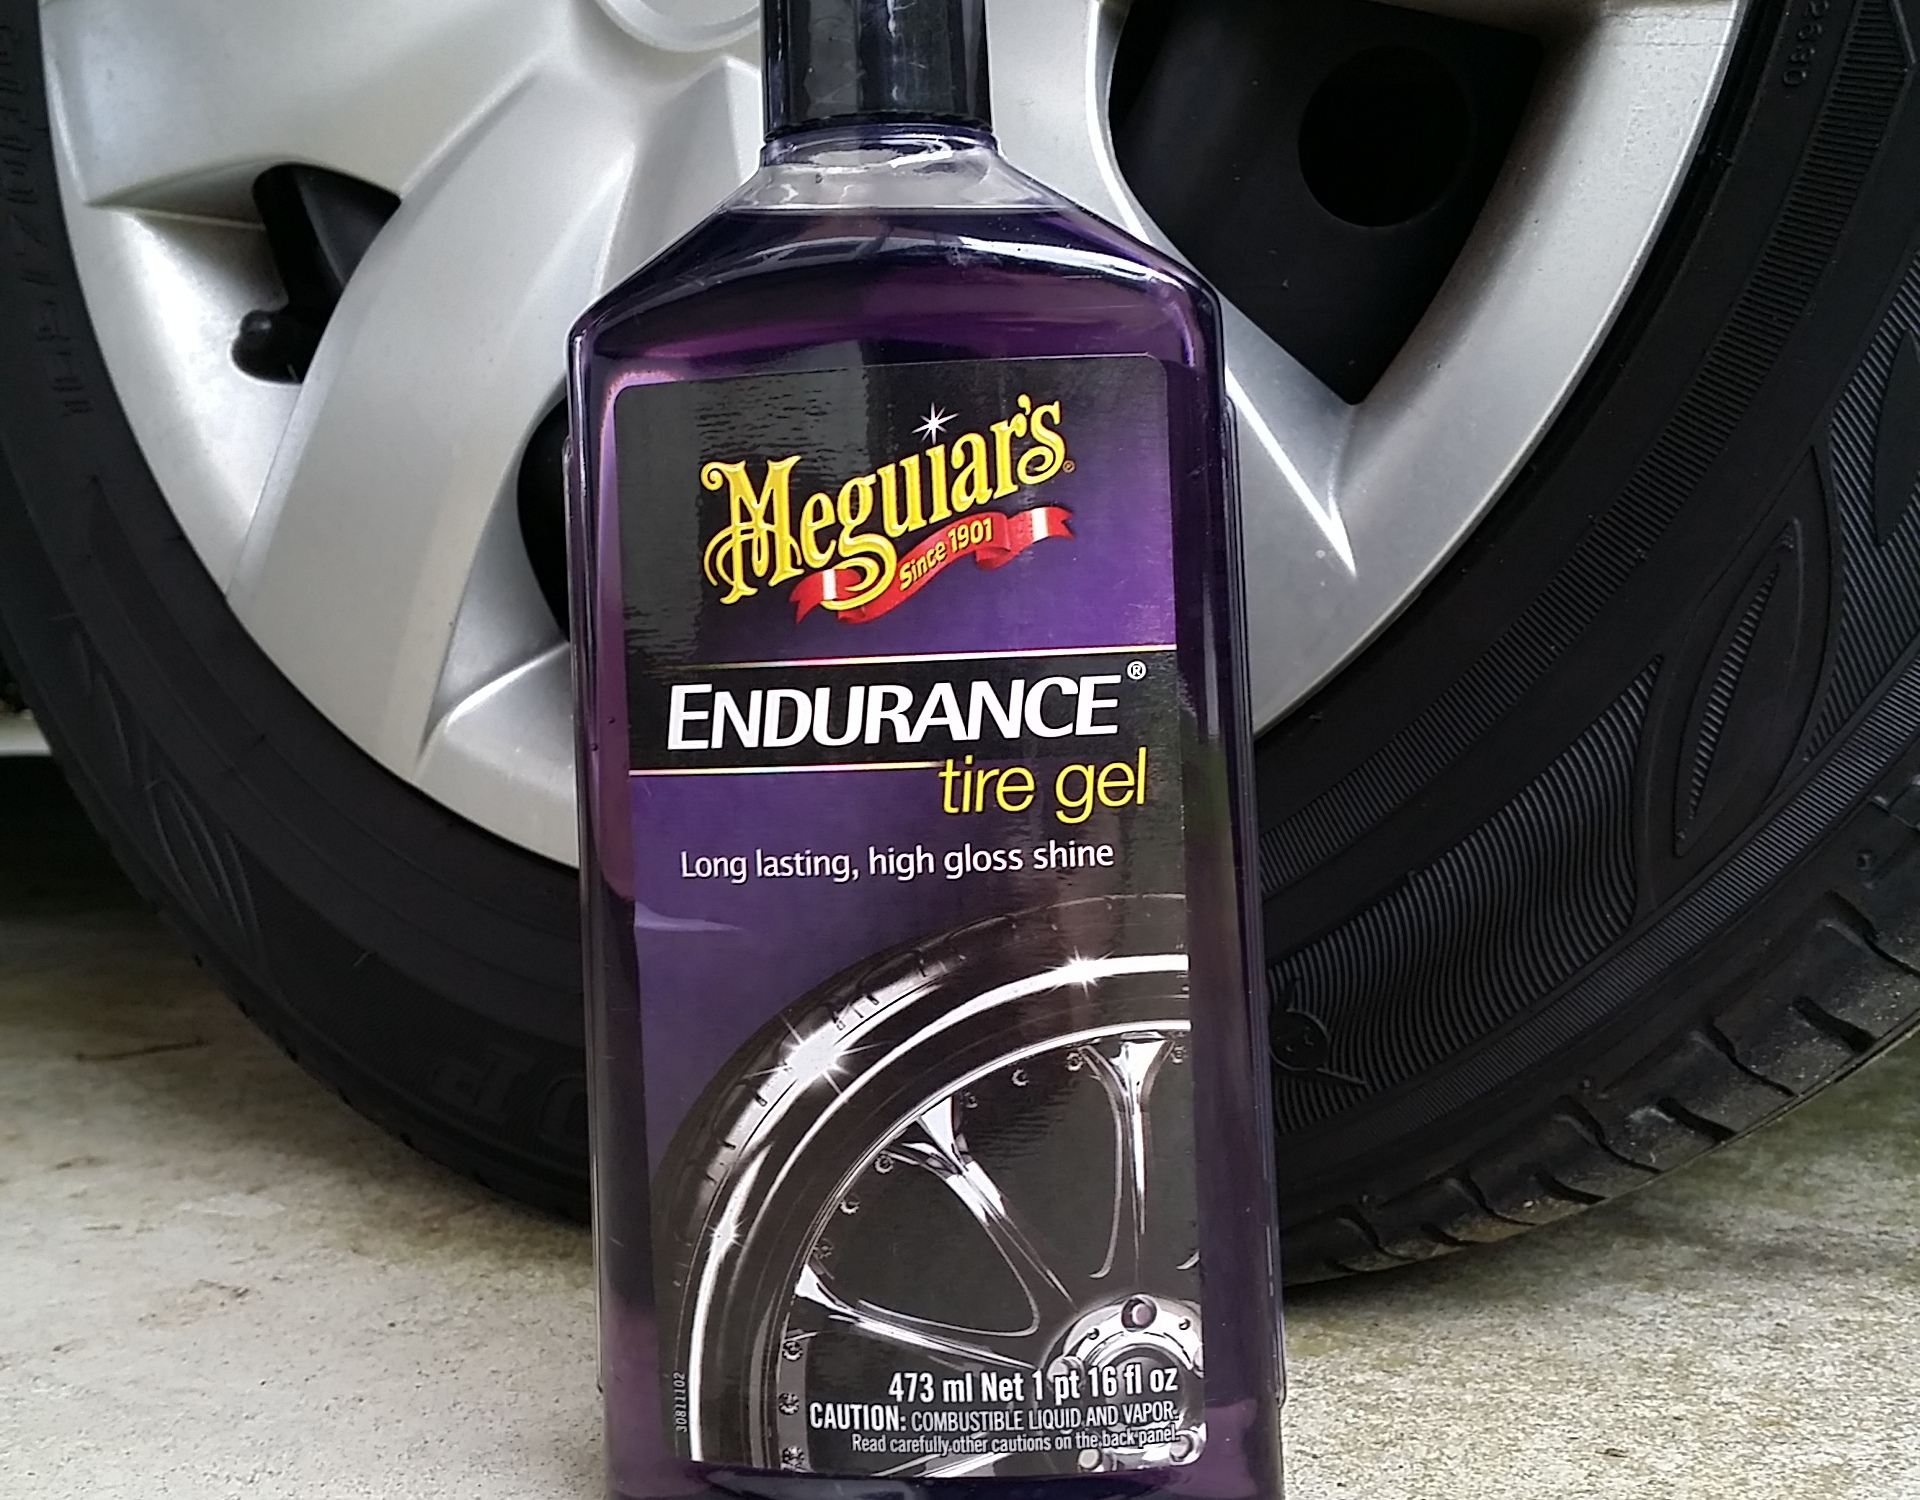 Meguiar's - Never used Endurance Tire Gel? Here's why you should! .  🍇Advanced polymers provide lasting, high gloss protection. 🍇Protects  against UV damage and browning. 🍇The rich gel allows for full control